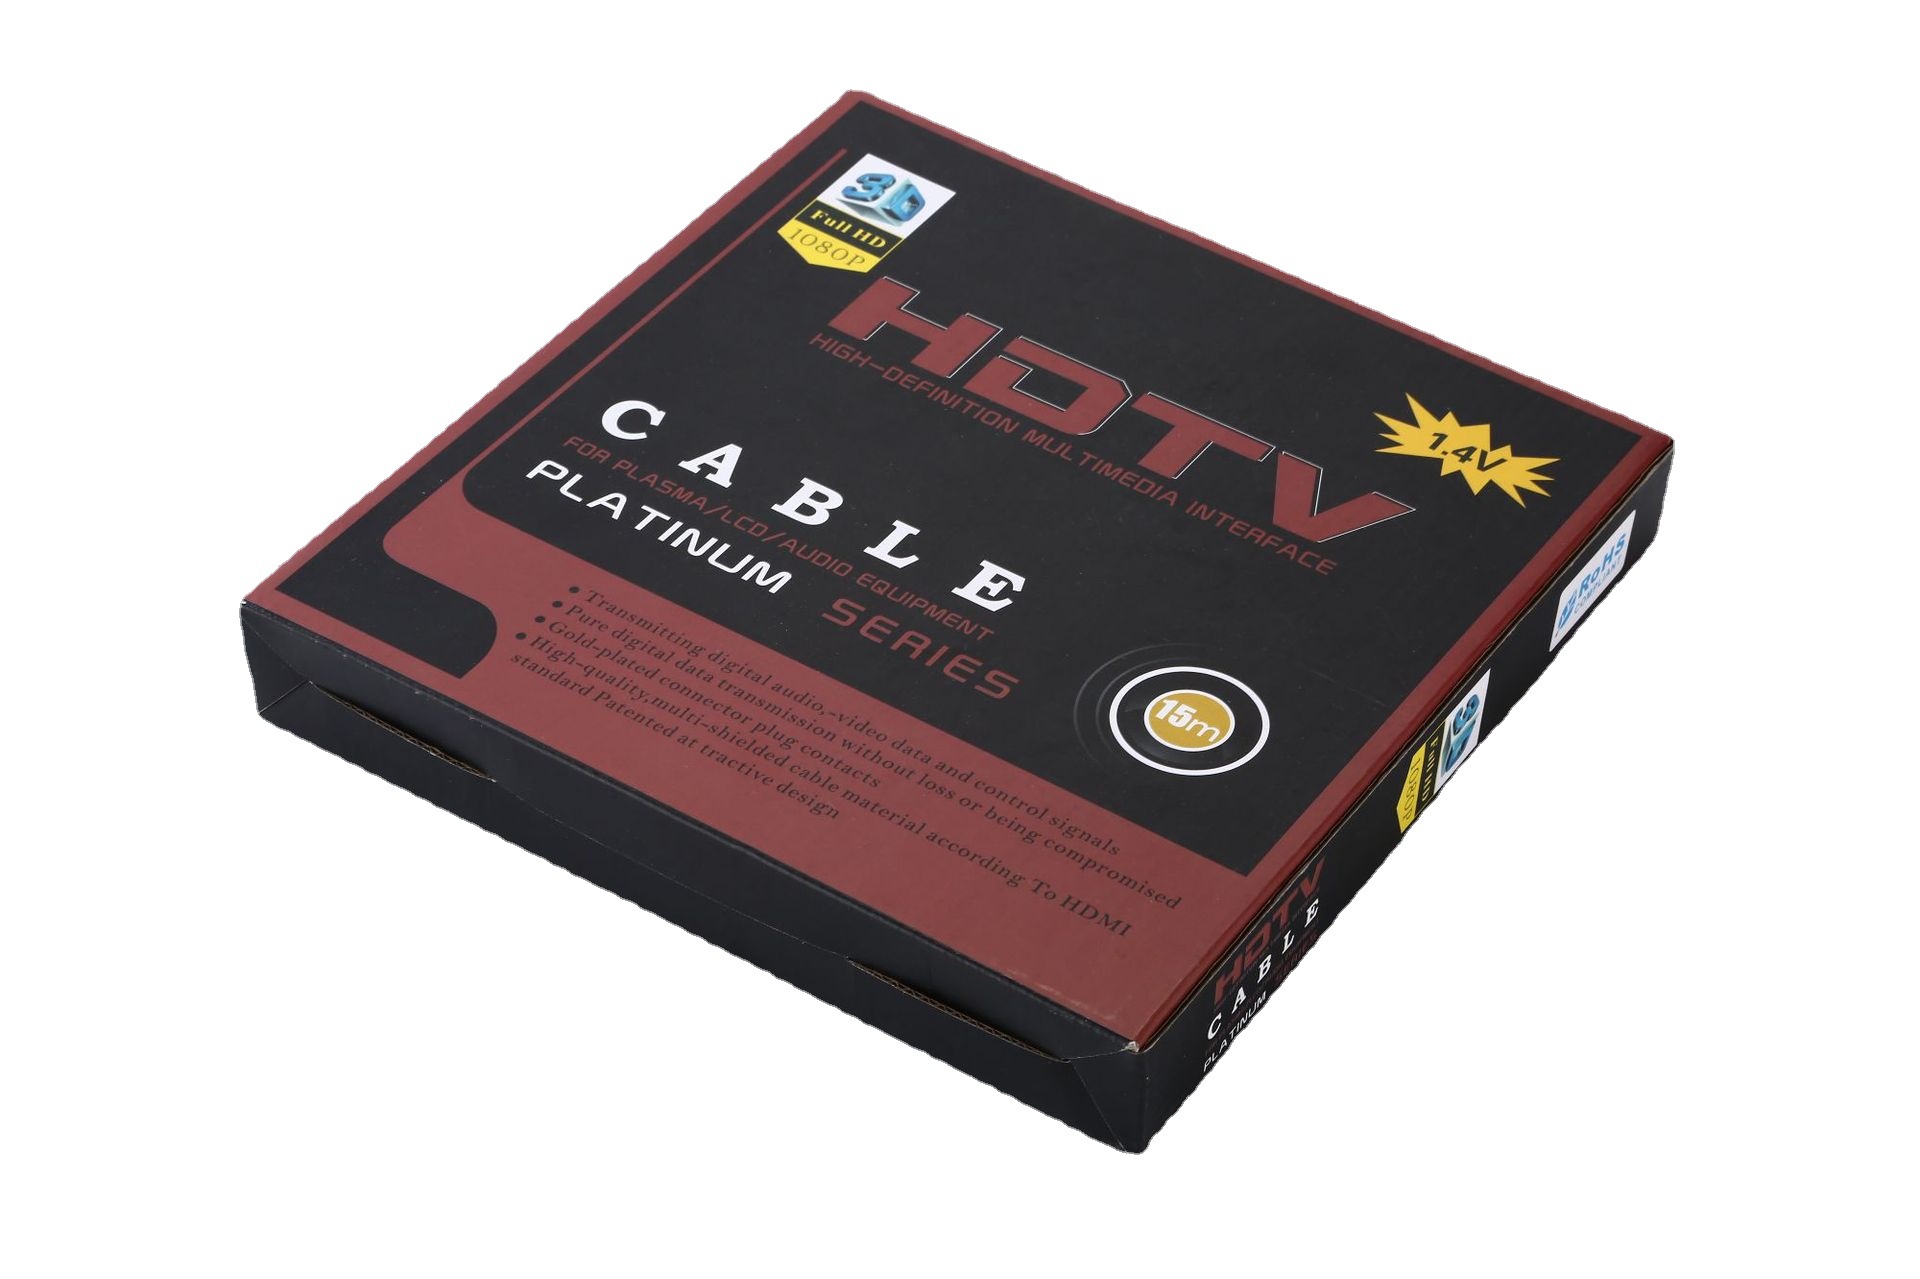 Hdmi TV Computer Hdmi Cable Multi-Strand Copper Single Copper Copper Clad Steel 14+119+1 All Kinds of Wire with Packing Box